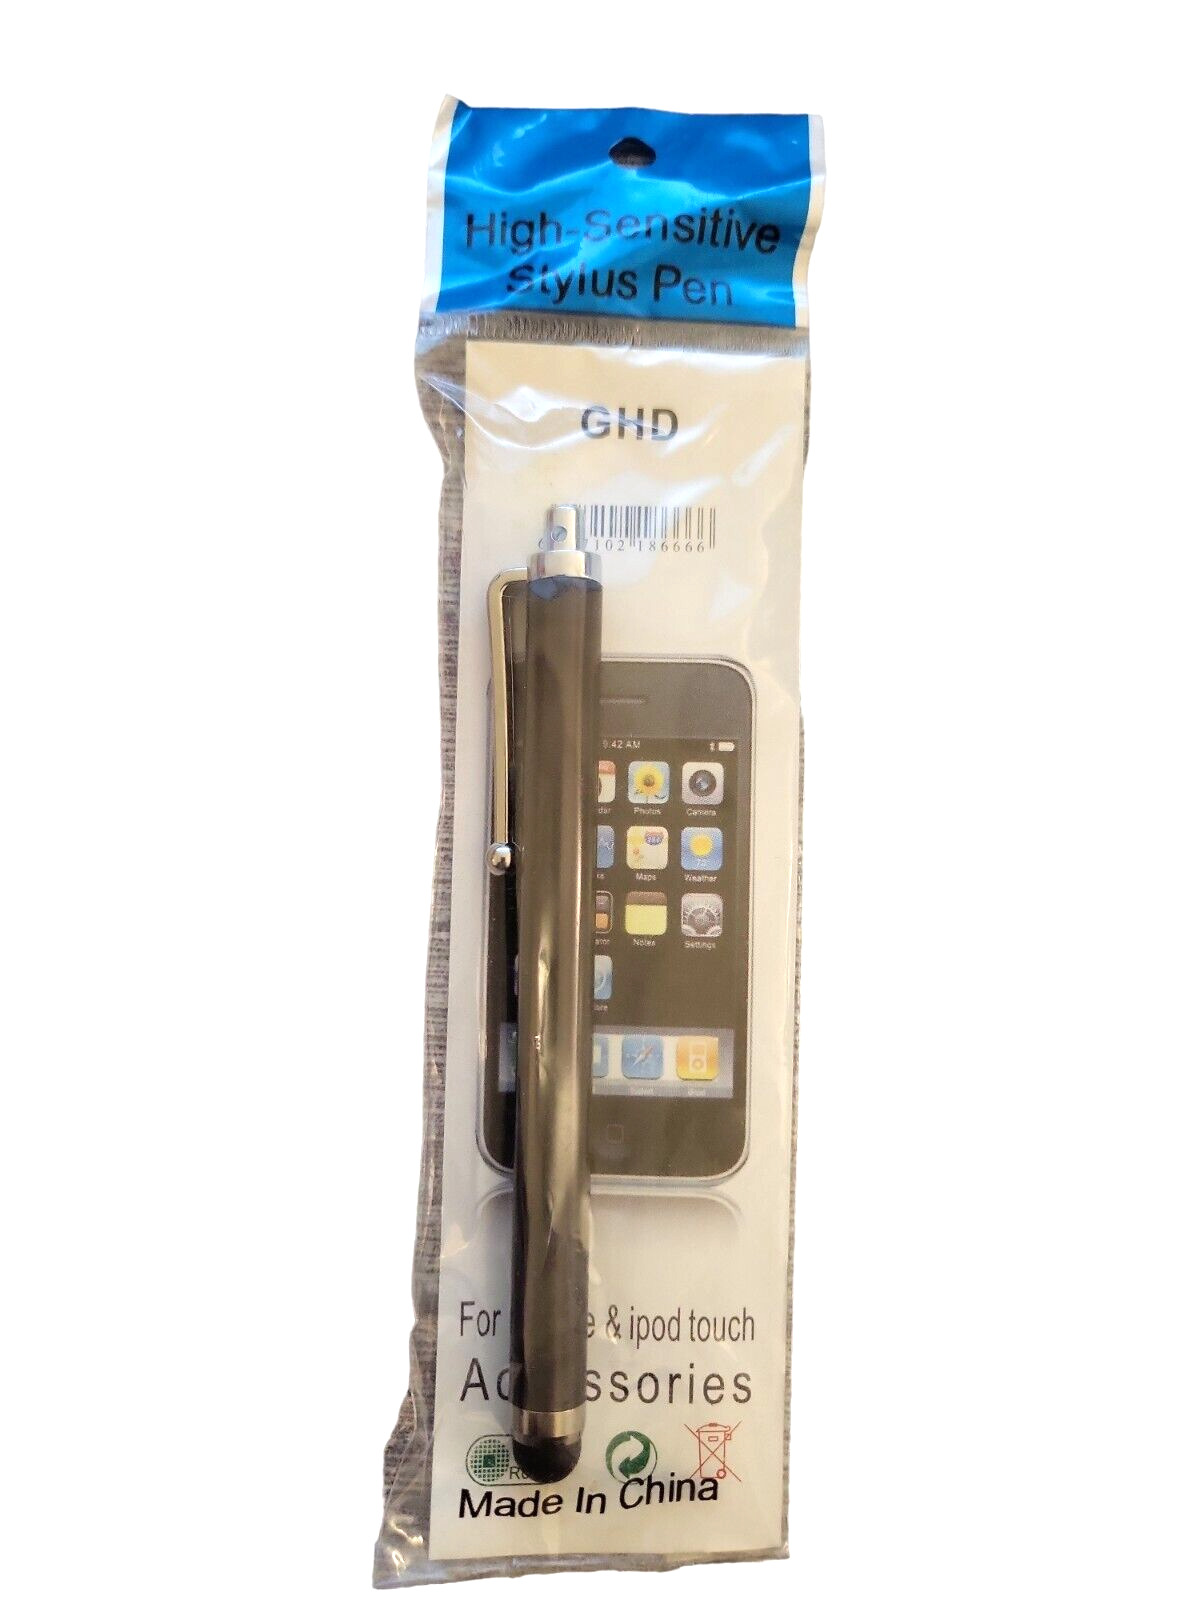 GHD Stylus Pen for ipad & Ipod touch & other PDA & cellphone